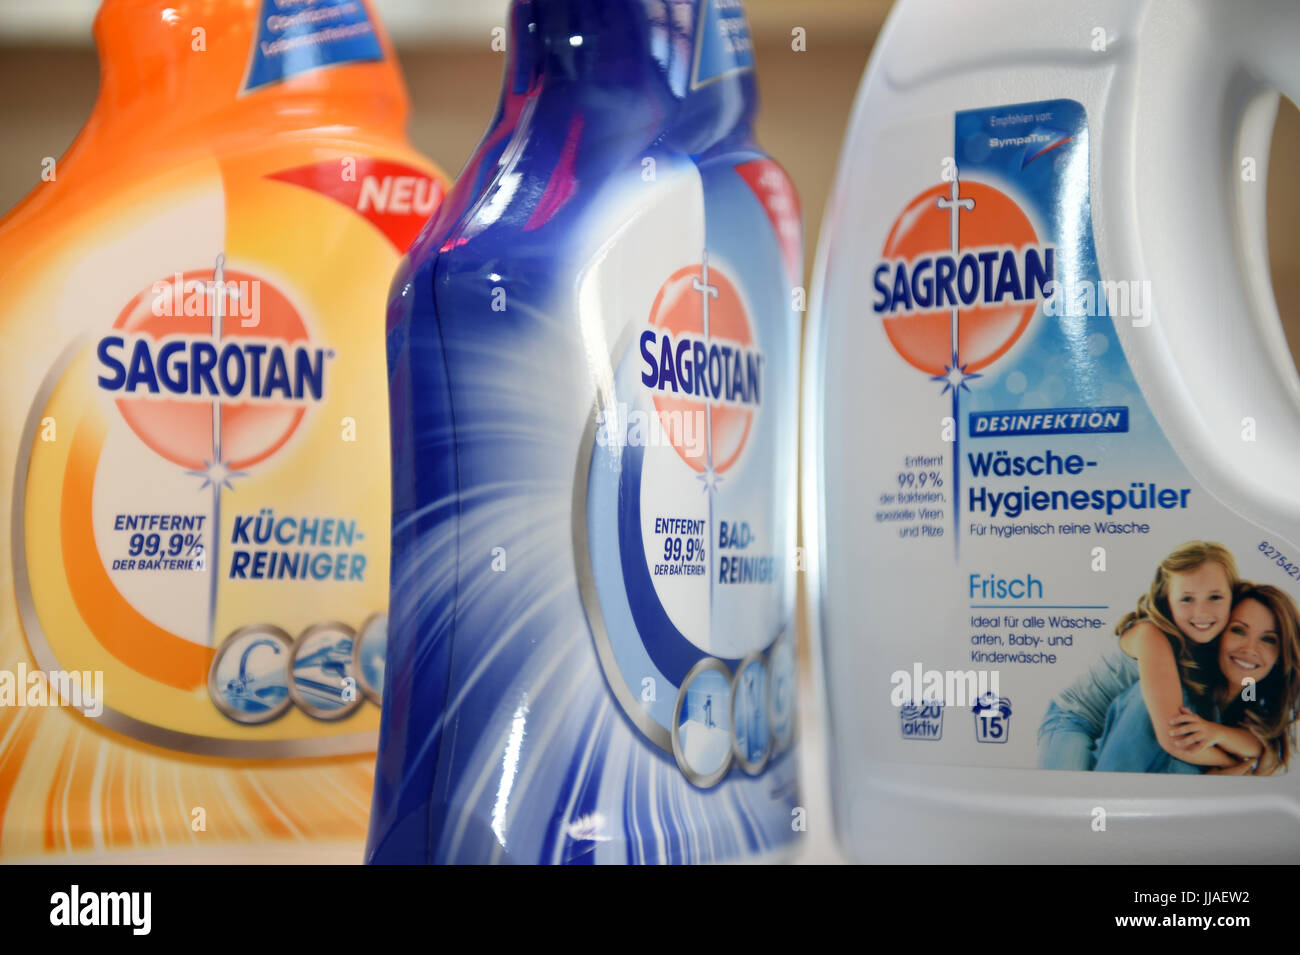 Munich, Germany. 19th July, 2017. Sagrotan-cleaning agents of British  consumer goods company Reckitt Benckiser can